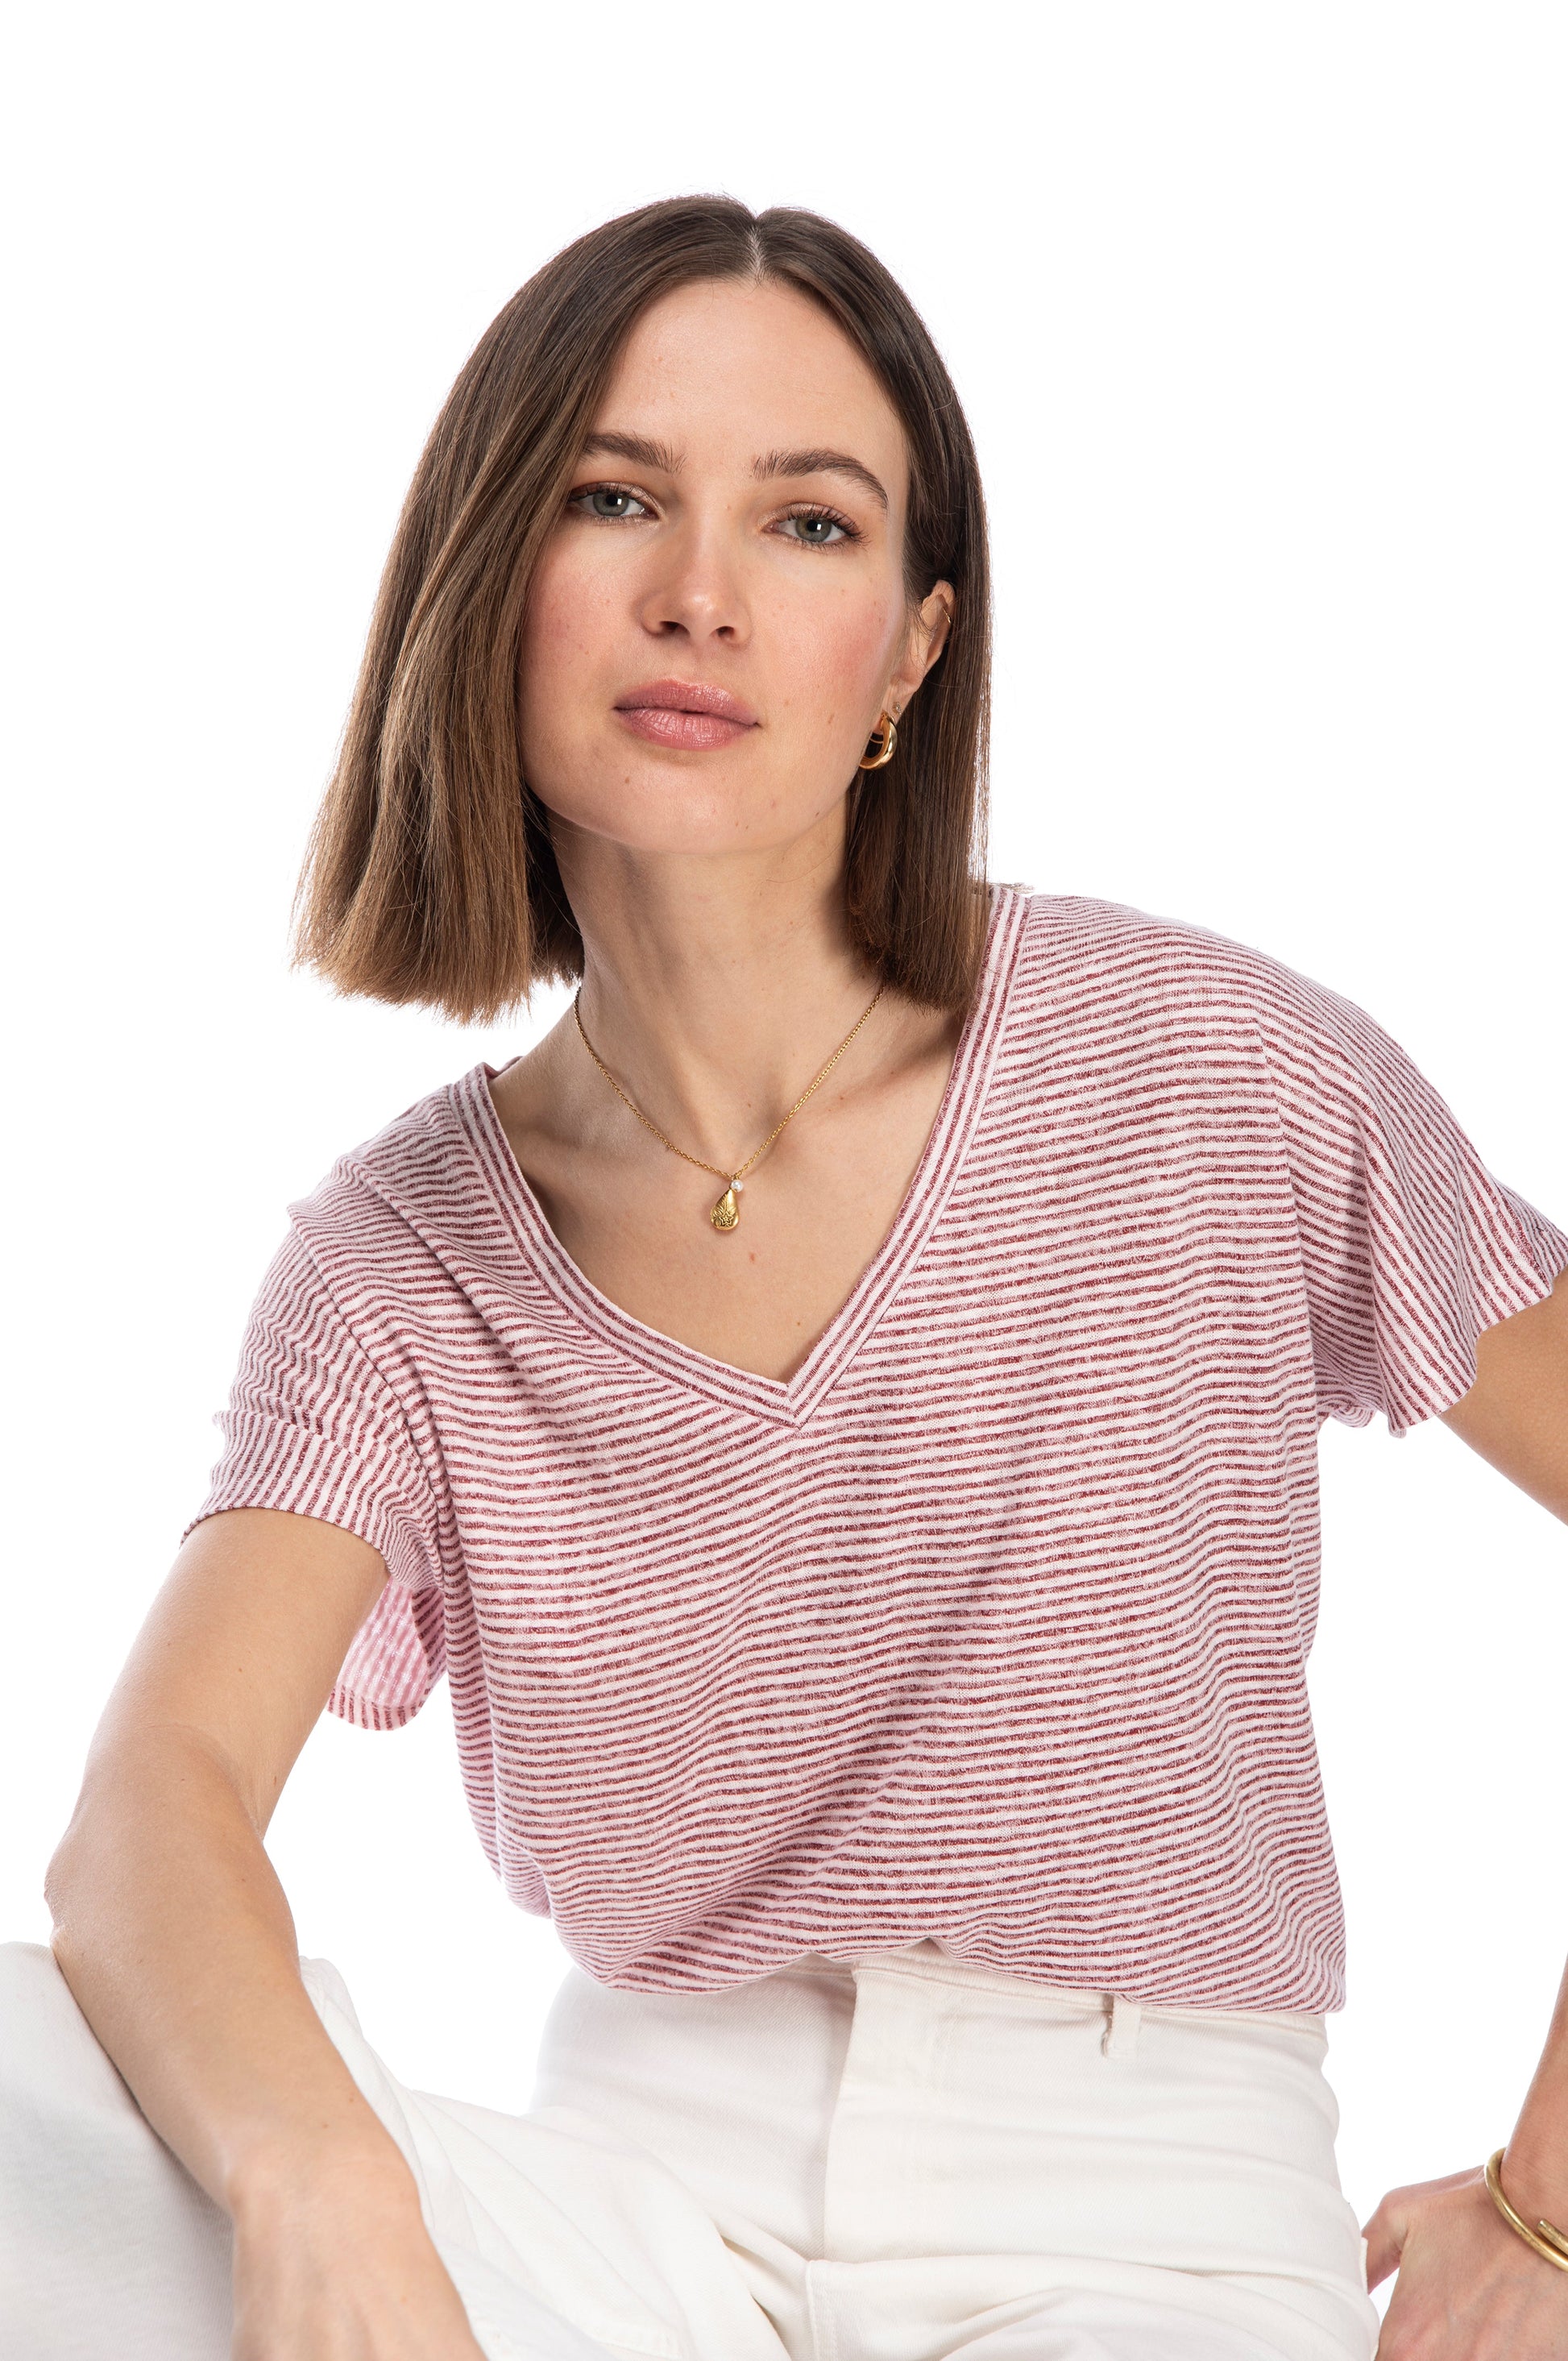 A woman with a confident gaze, wearing a casual striped CATY RELAXED tee by B Collection by Bobeau and white pants, poses for the camera against a white background.